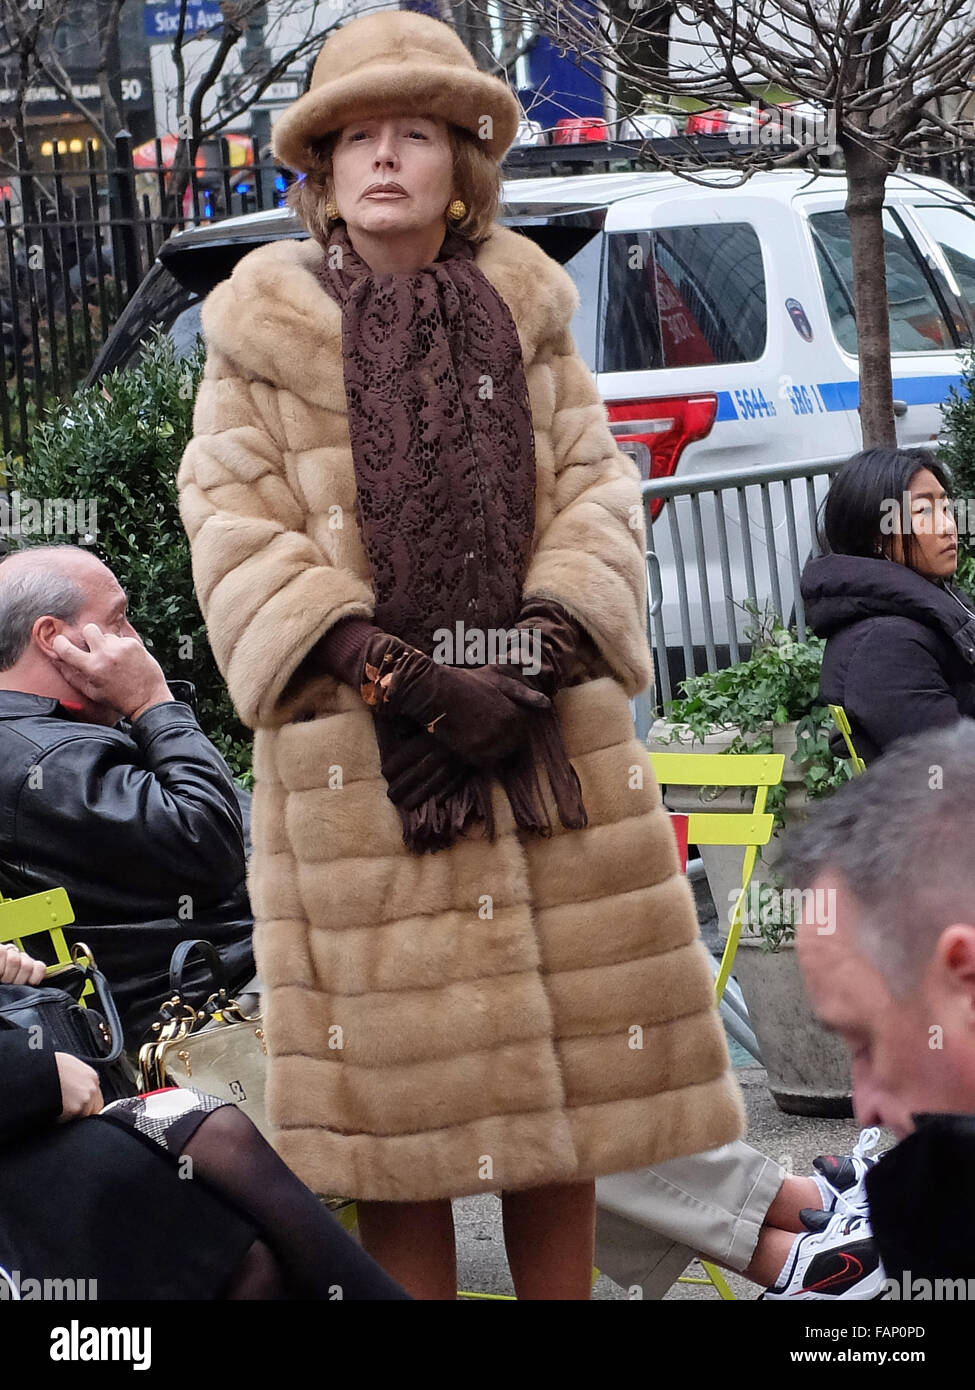 A woman in a matching coat and hat that appear to be real fur. At Herald Square in Midtown Manhattan, New York City. Stock Photo